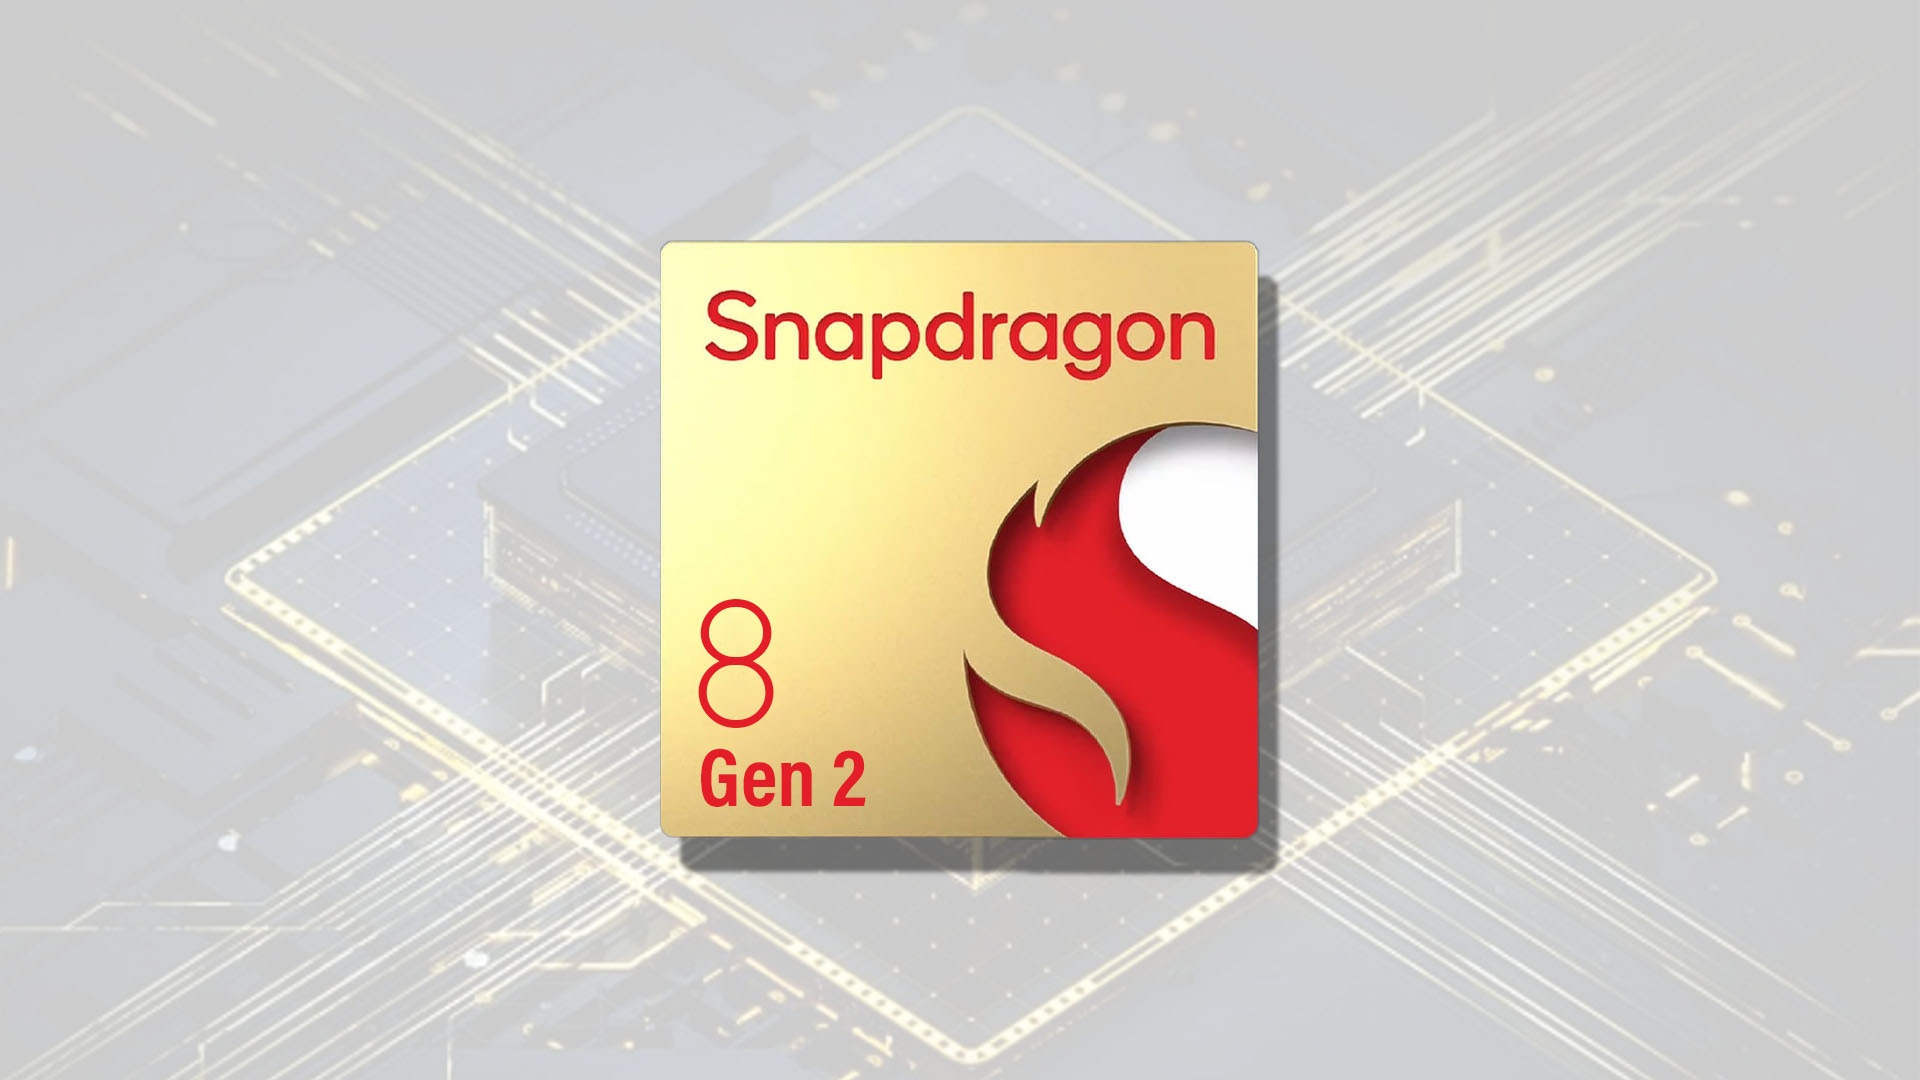 Qualcomm announces its latest flagship chipset, the Snapdragon 8 Gen 1, developed on a new architecture with a powerful new Cortex-X2 core. We recently compared the Snapdragon 8 Gen 1 to the MediaTel Dimensity 9000 to gauge its performance in the Android market. We also compared Snapdragon 8 Gen 1 to Google Tensor to assess the merits of Google's departure from Qualcomm chipsets. However, in this article, we'll compare Snapdragon 8 Gen 1 to Apple A15 Bionic and Exynos 2100. Let's proceed to the comparison.